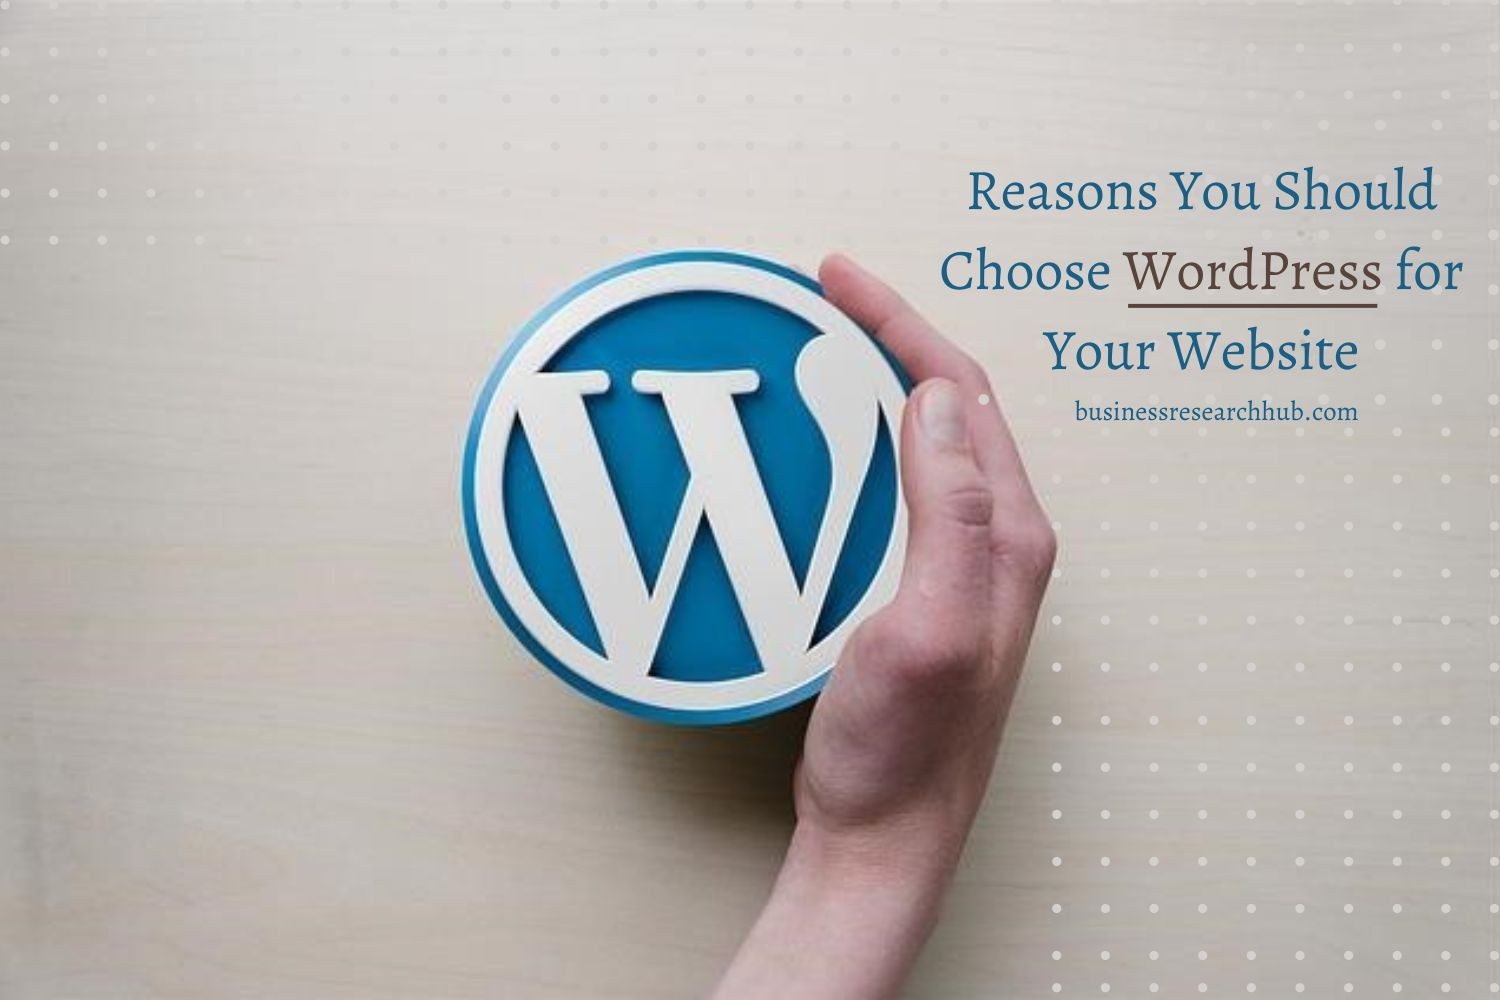 A person holding a WordPress logo, symbolizing why you should choose WordPress for your website